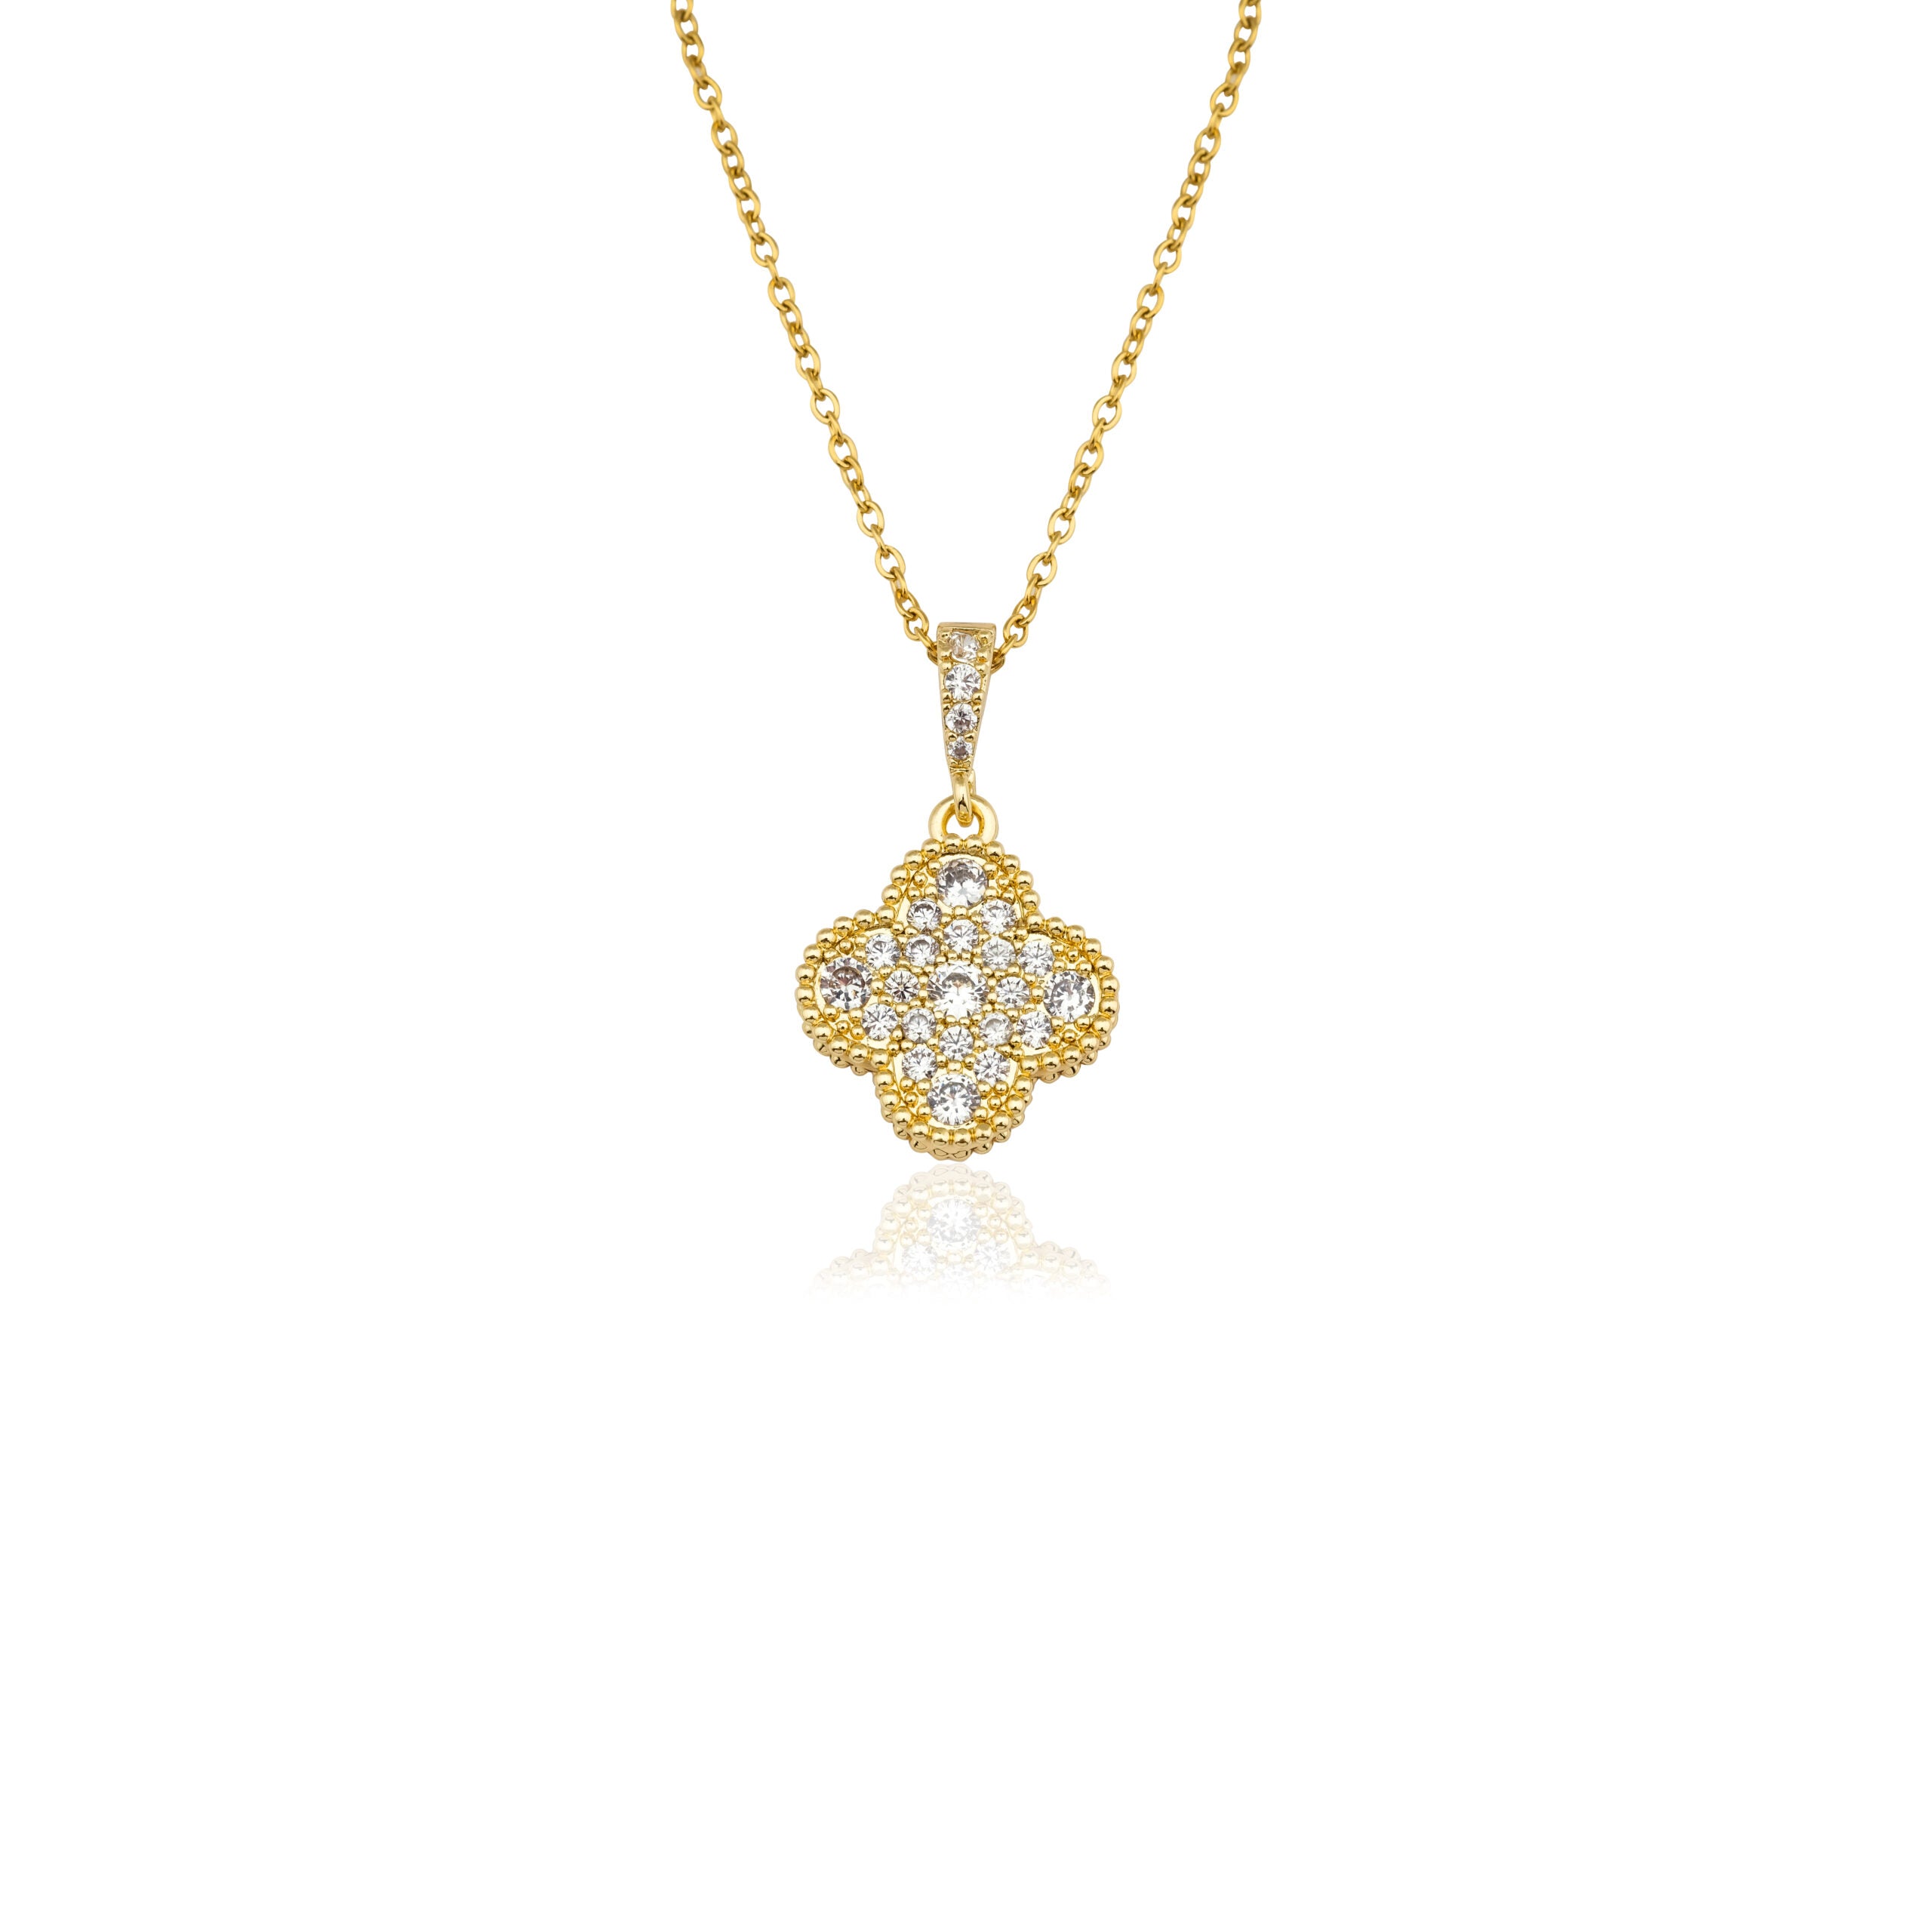 Crystal Clover necklace